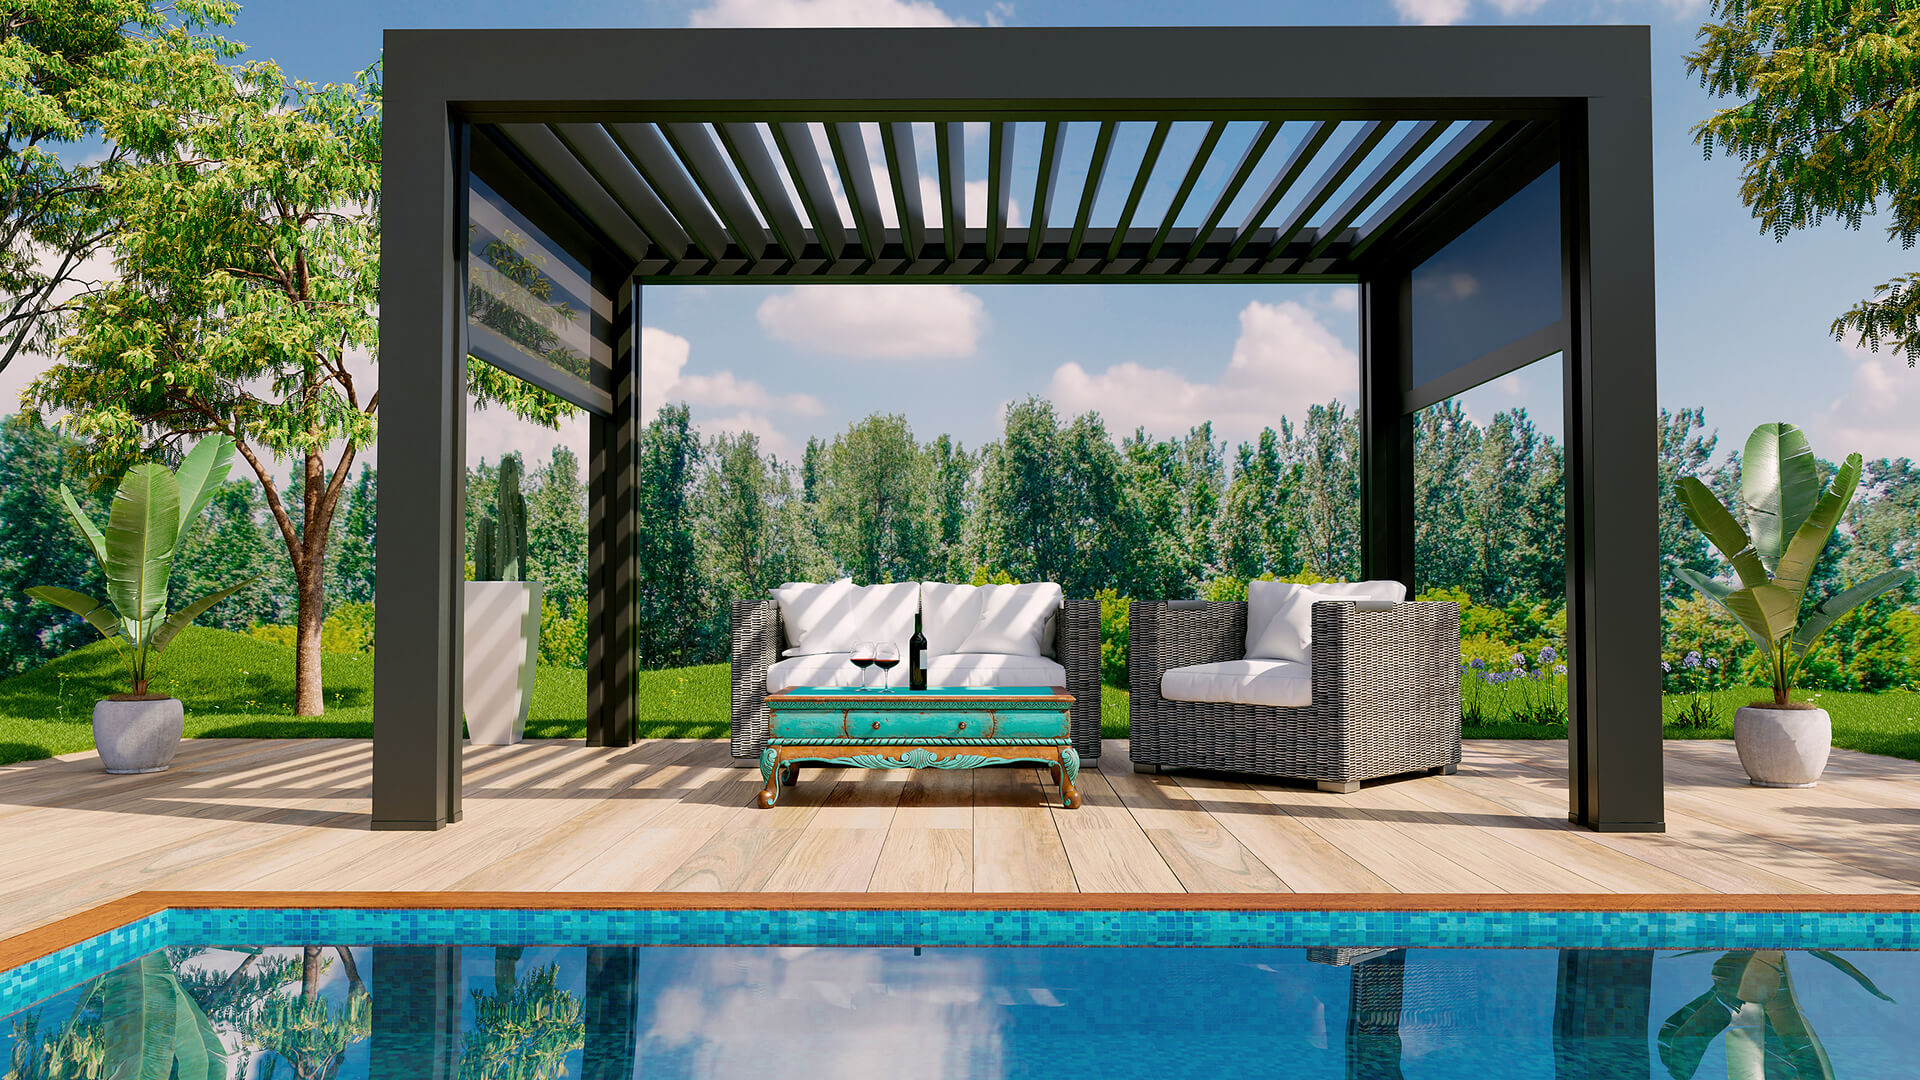 A motorized pergola covers a sitting area on a pool deck.